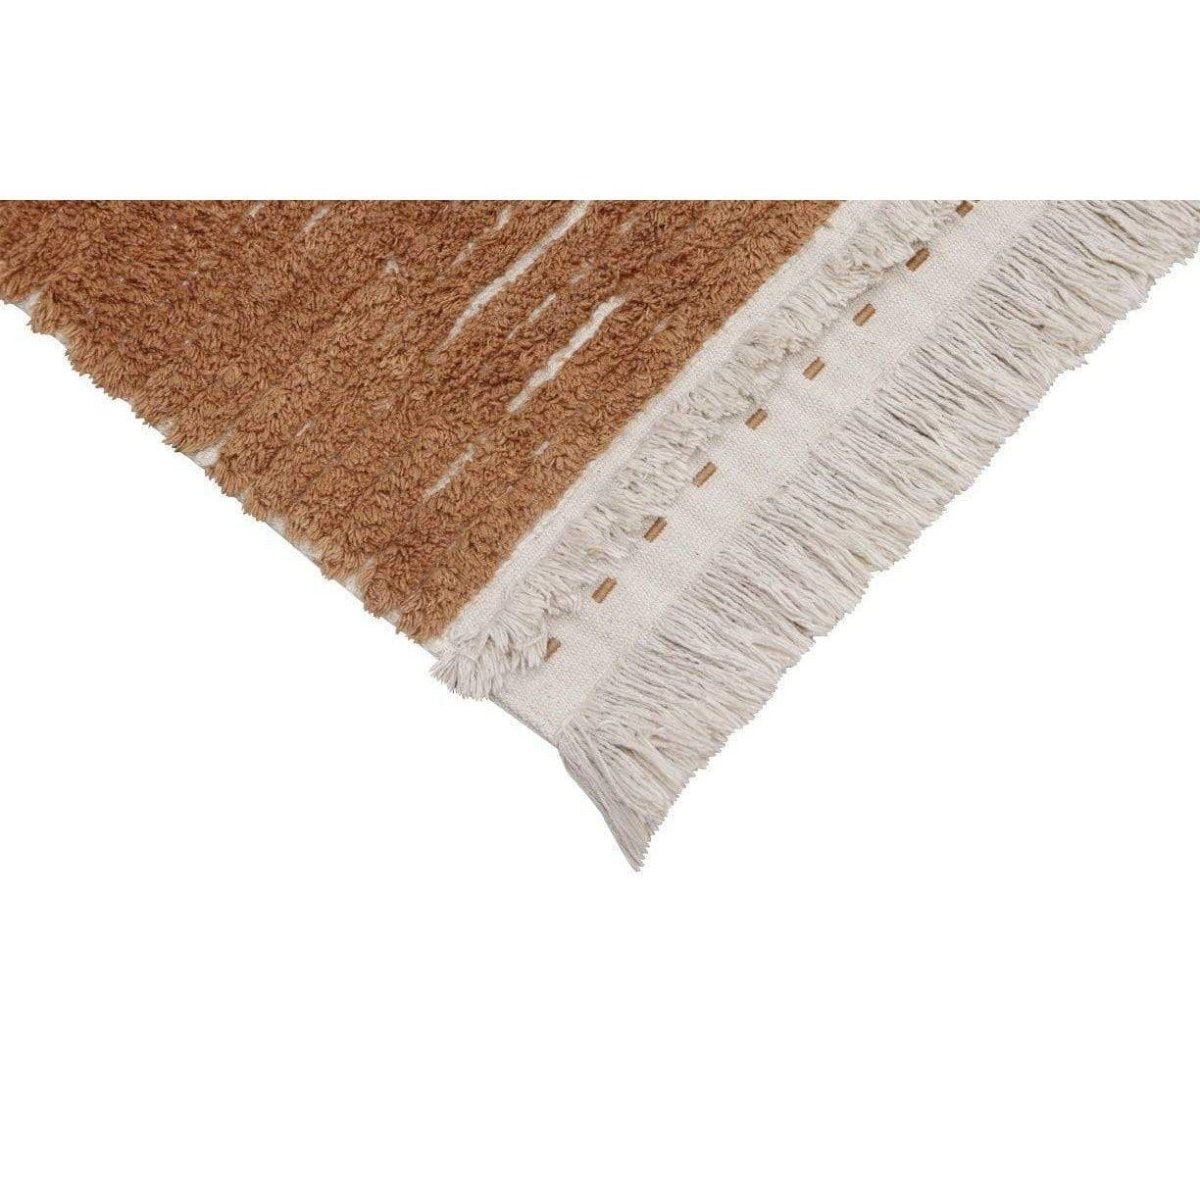 LORENA CANALS-Tapis Lavable Reversible Duetto Toffee 170 X 240 Cm-Les Petits